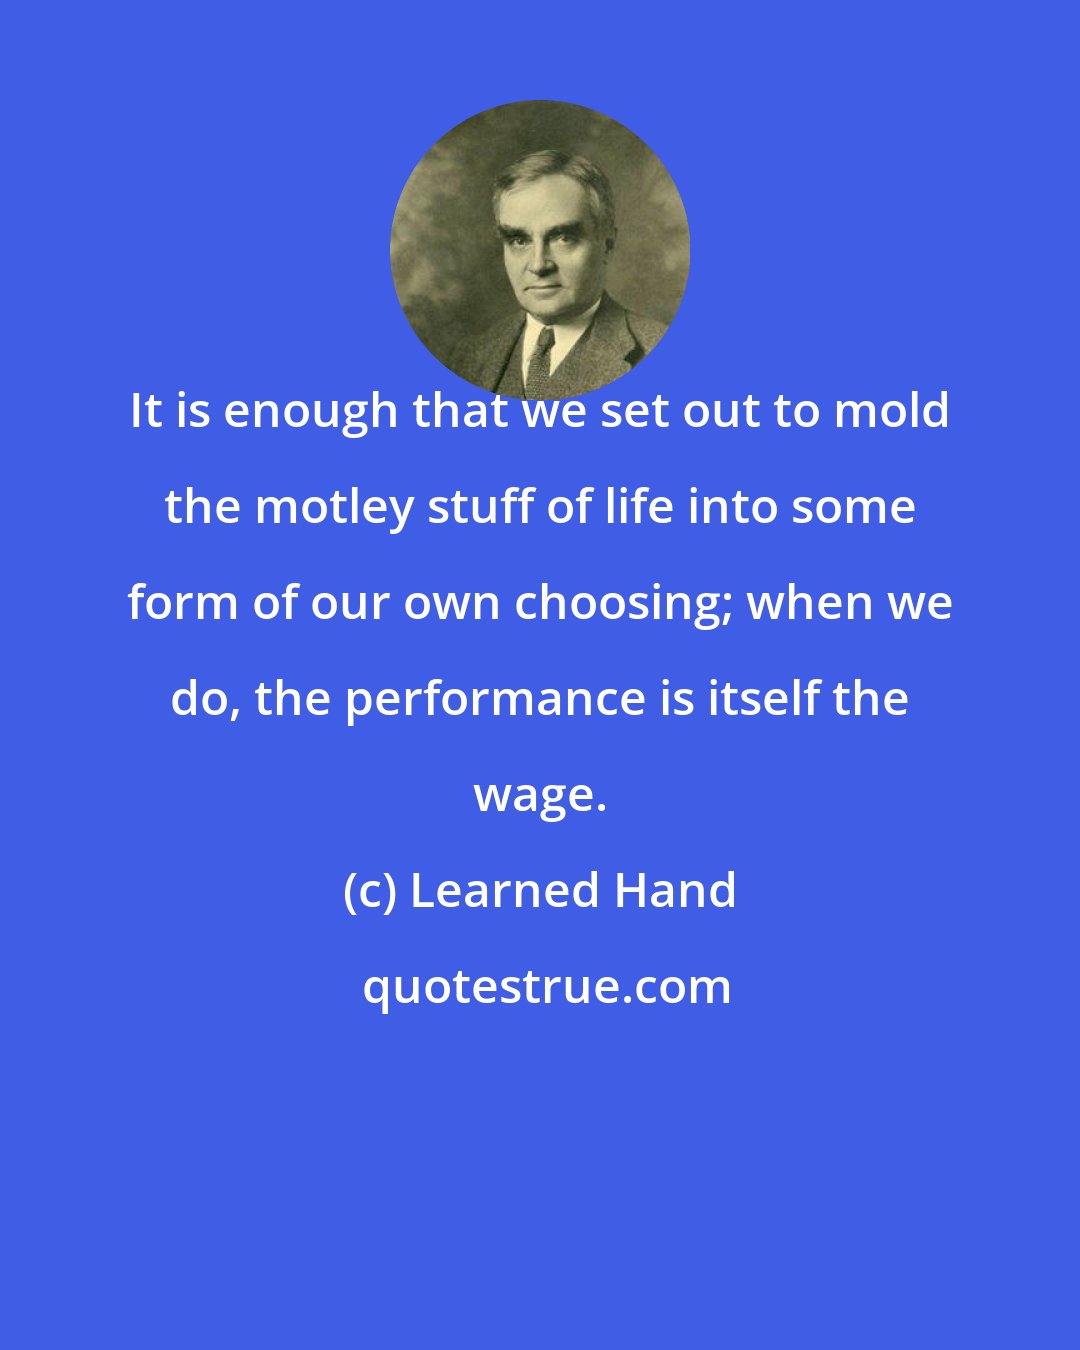 Learned Hand: It is enough that we set out to mold the motley stuff of life into some form of our own choosing; when we do, the performance is itself the wage.